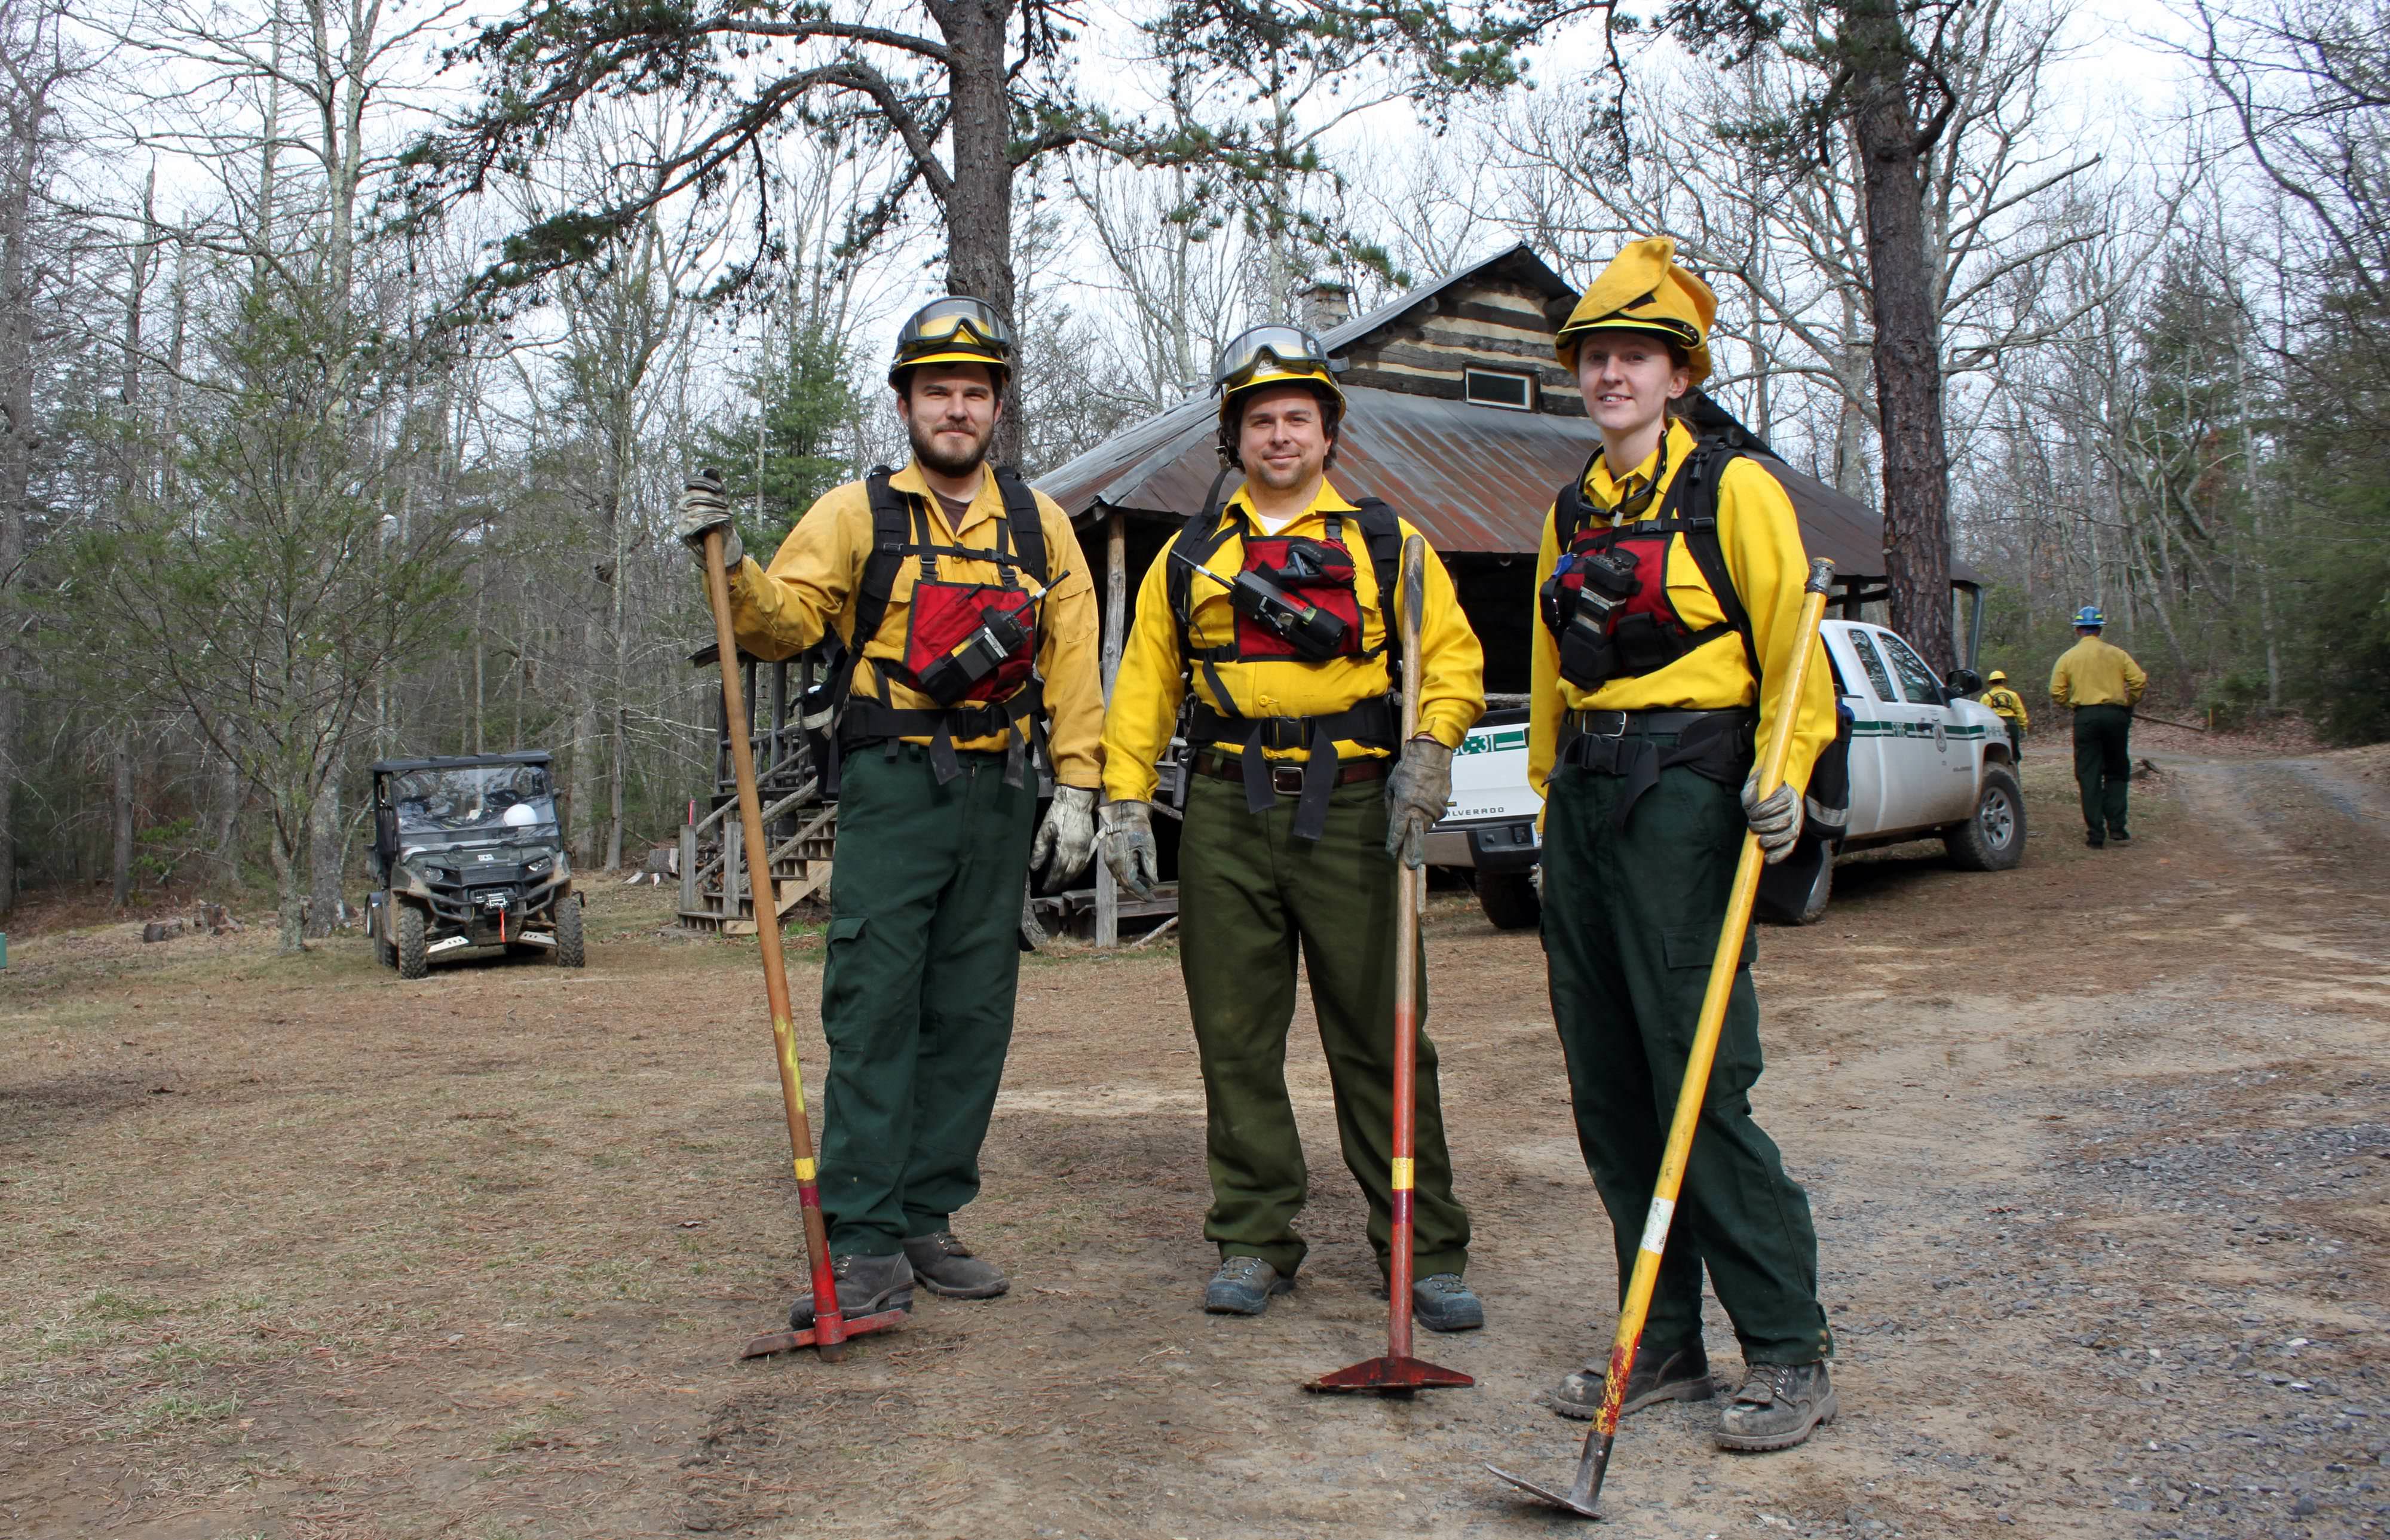 Three people pose together in front of a rustic cabin. They are wearing yellow fire-retardant gear and holding long-handled hoes. A white pickup truck is parked behind them.